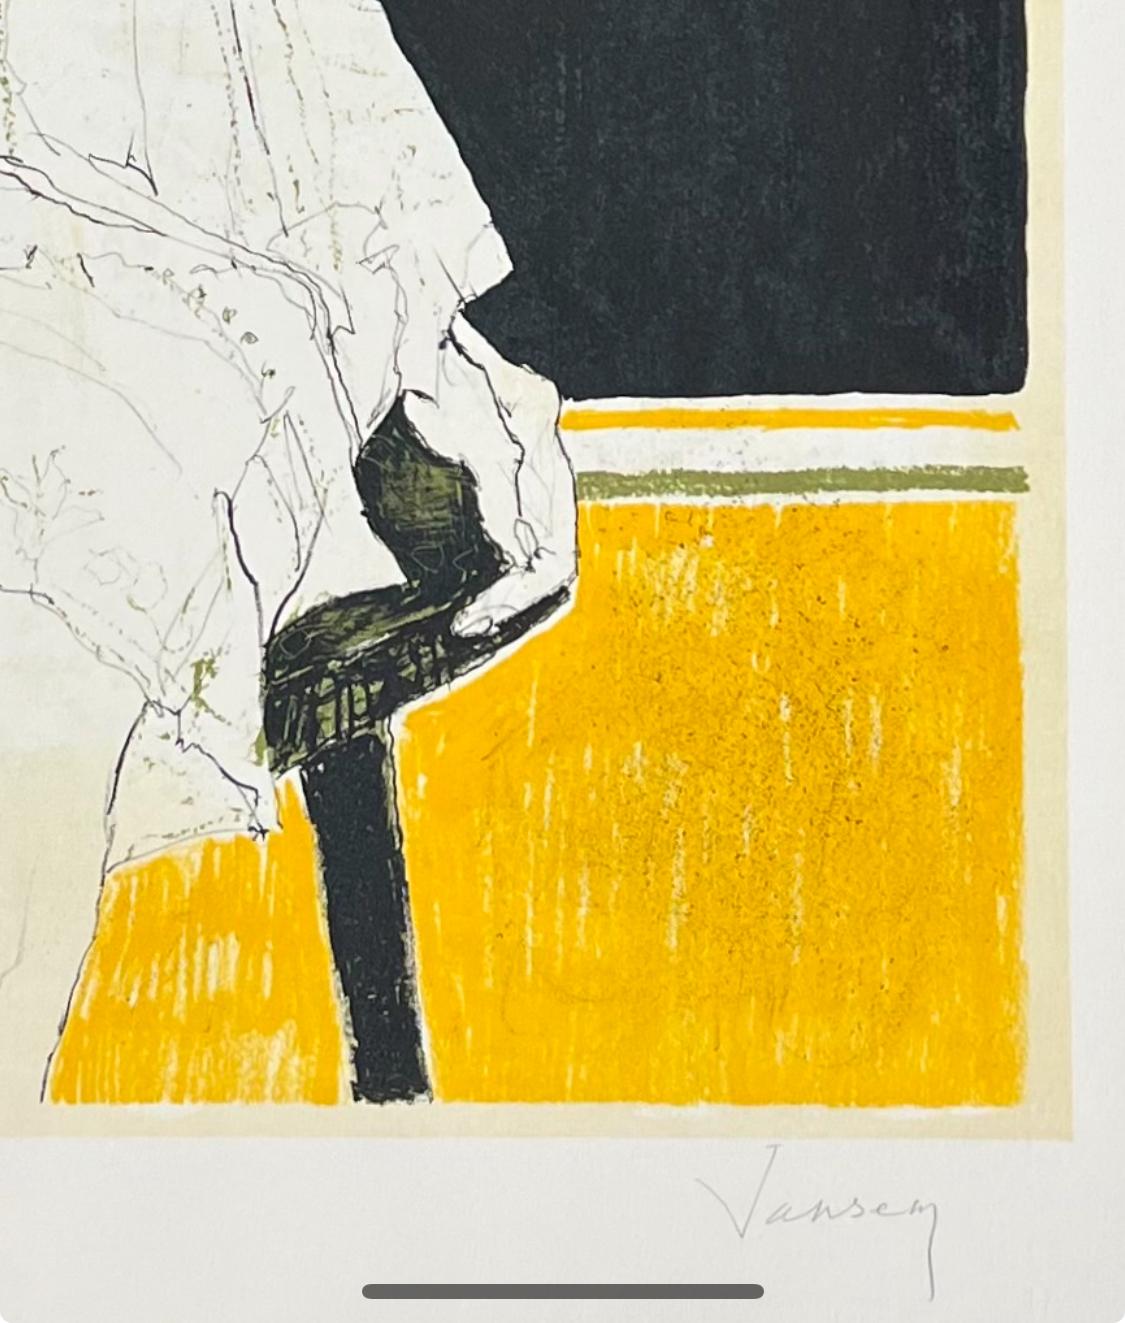 Sonia fond jaune, 1995, original lithograph by Jean Jansem, handsigned, numbered 1